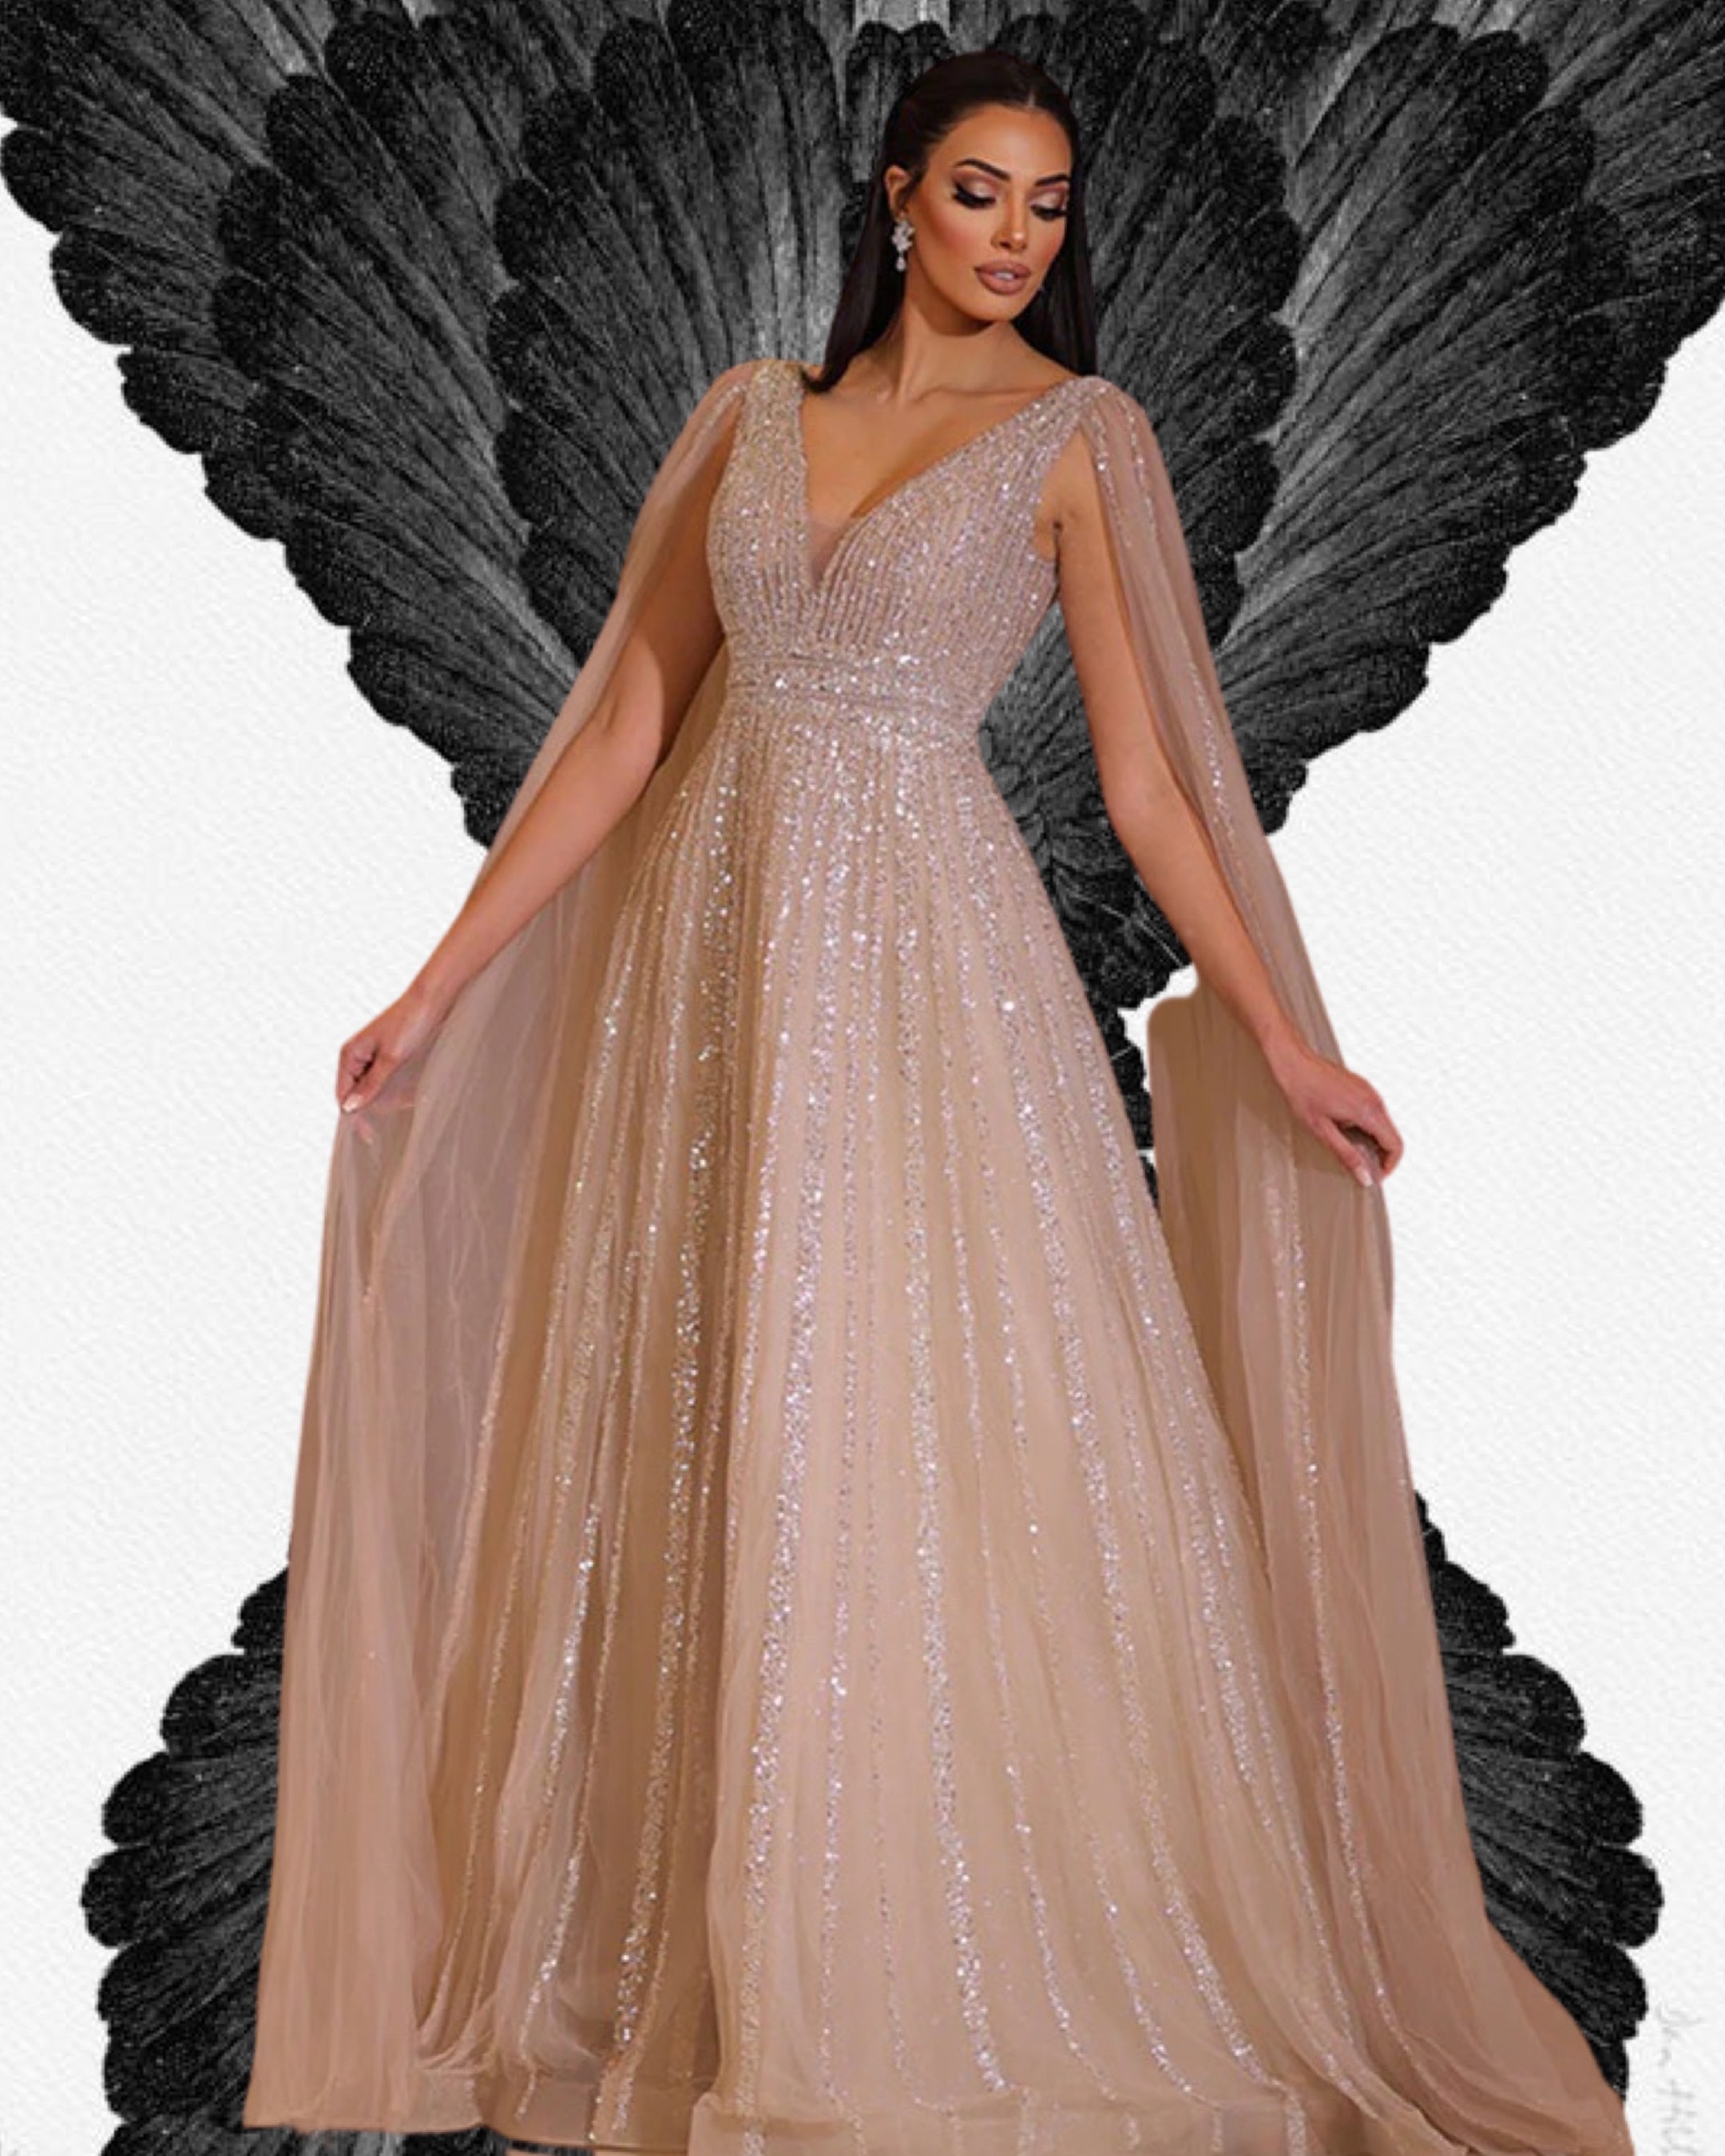 Pink Champagne Wedding Gown With Veiled Wing Sleeve, A Line Formal Dress - ANGEL